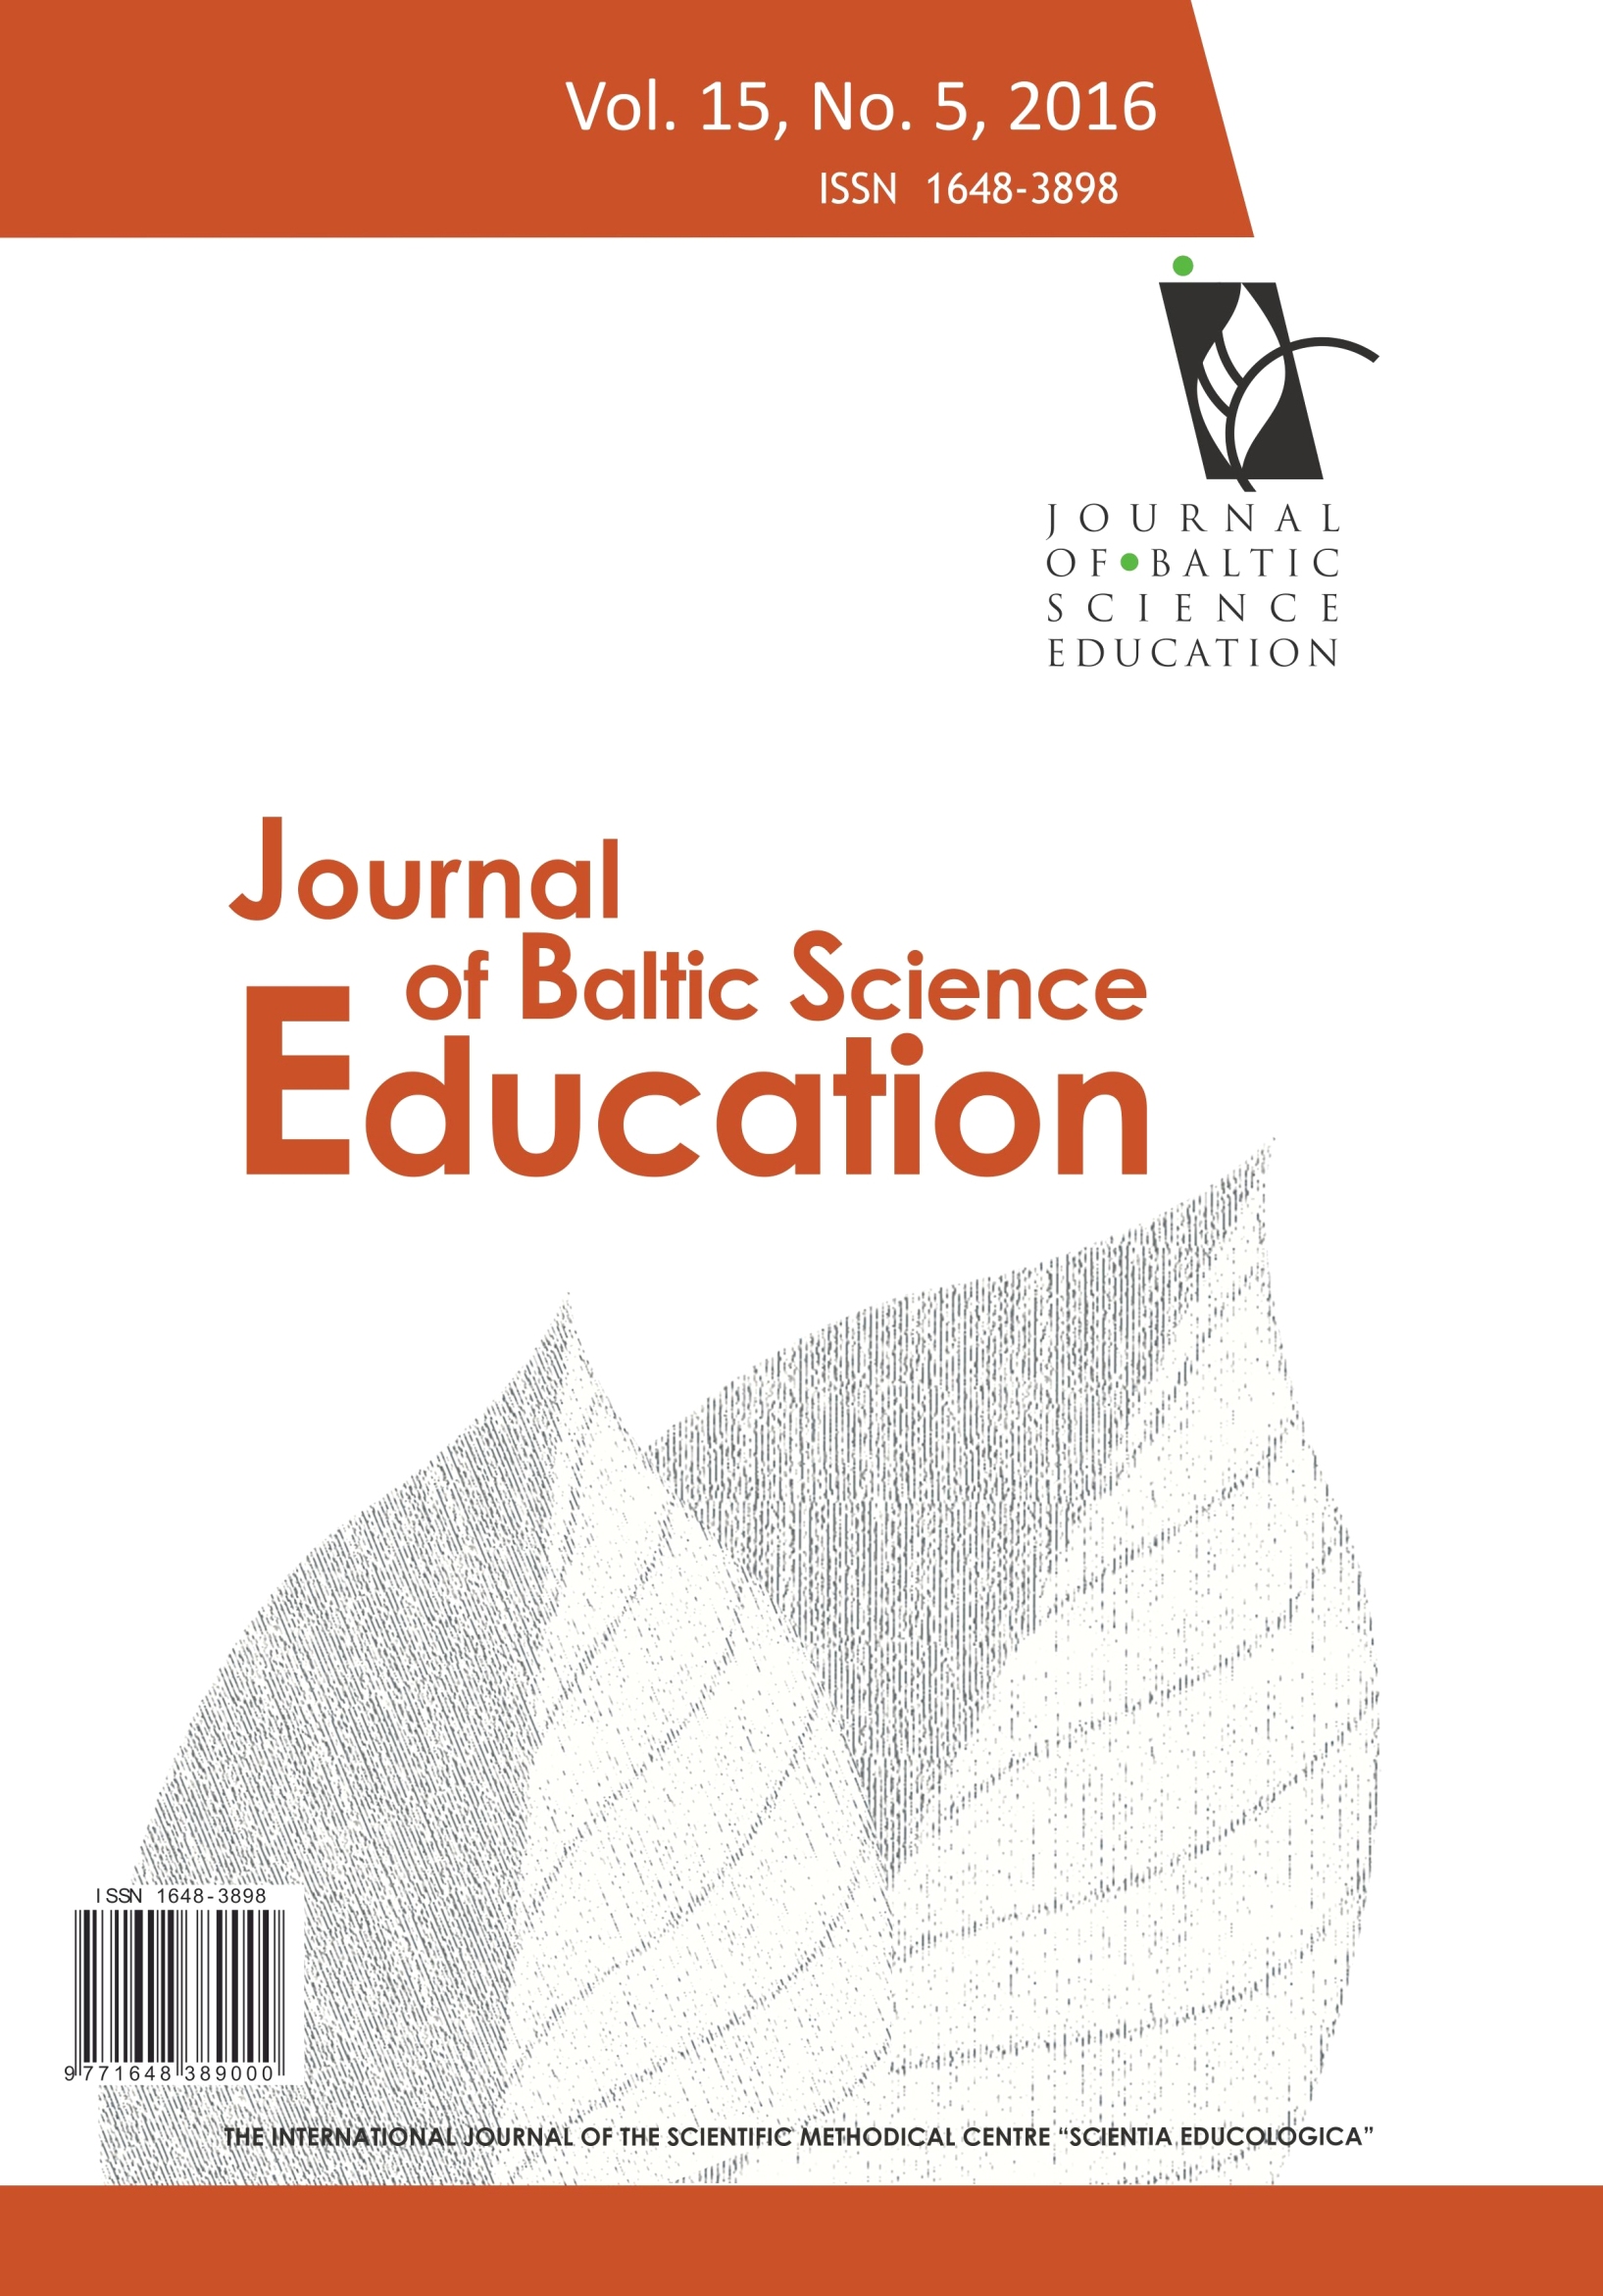 LEARNING STYLE AS A FACTOR INFLUENCING THE EFFECTIVENESS OF THE INQUIRY-BASED SCIENCE EDUCATION AT LOWER SECONDARY SCHOOLS